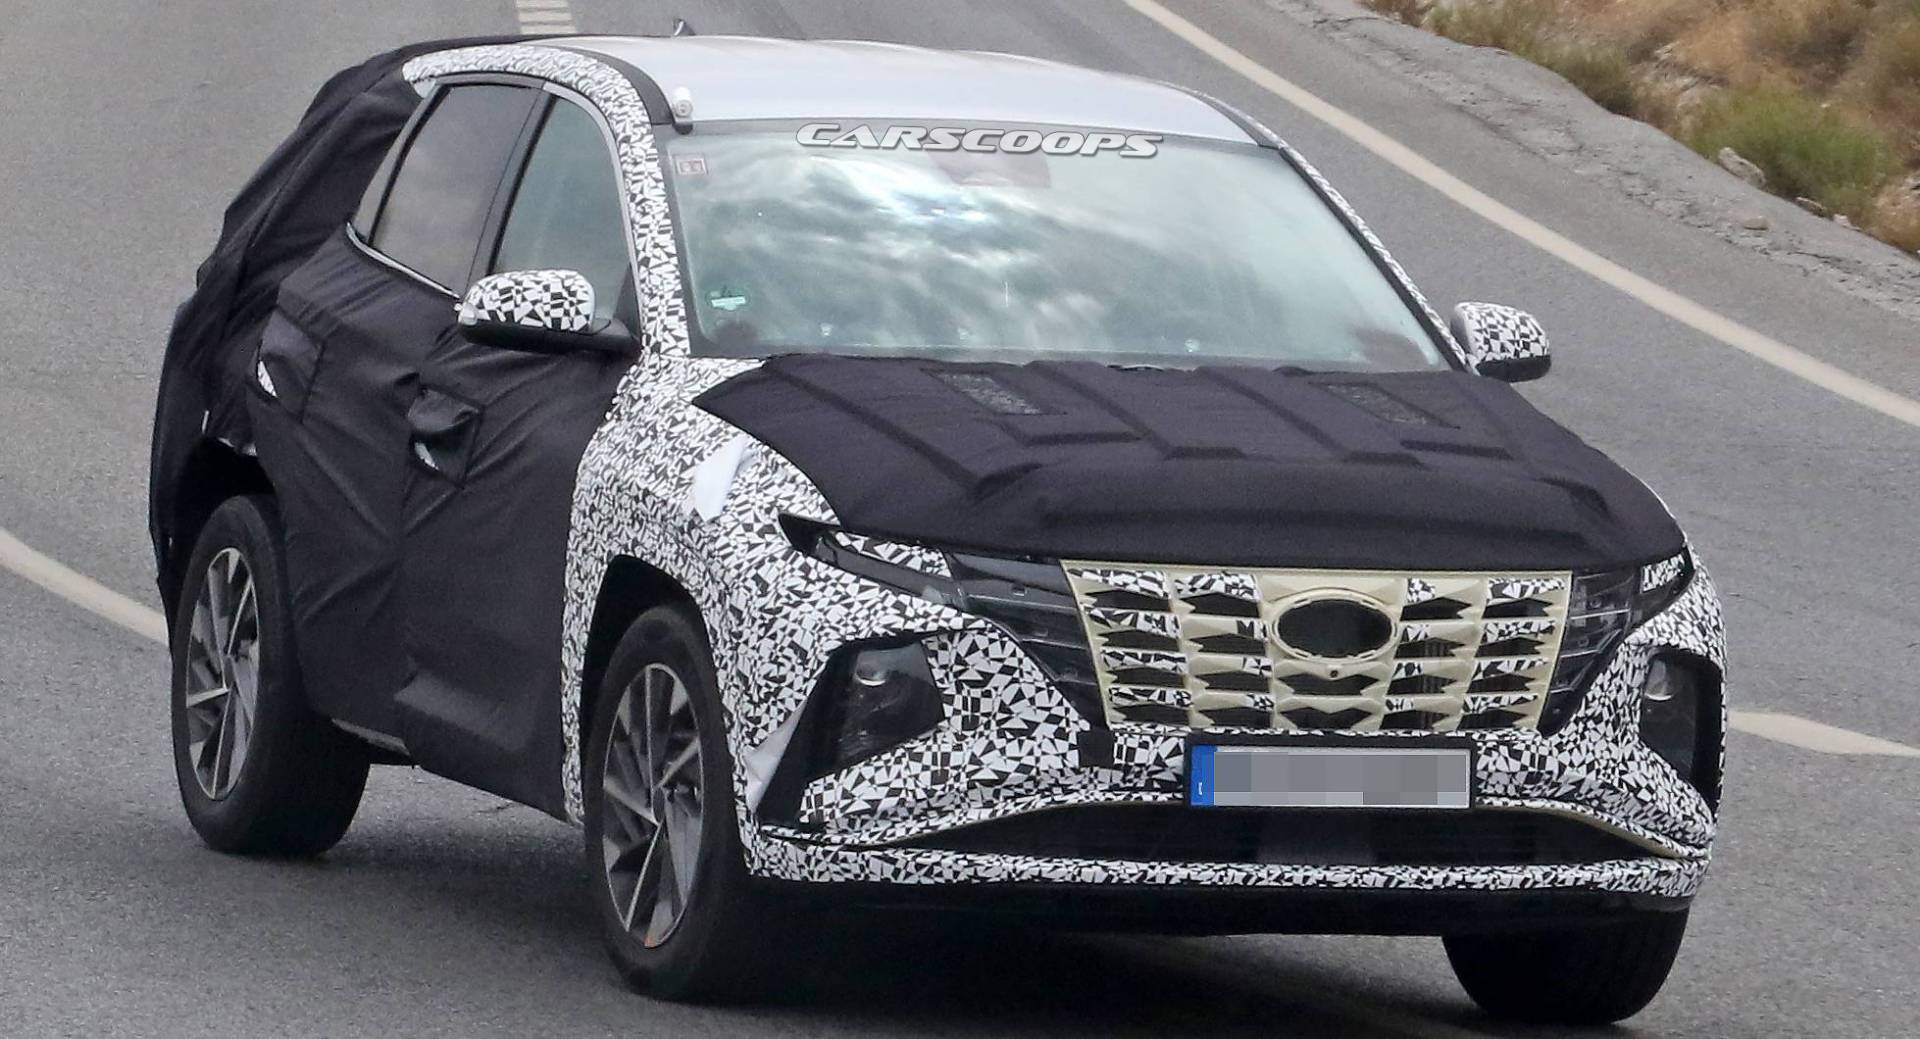 2021 Hyundai Tucson Sheds Camo To Reveal Dramatic Front ...